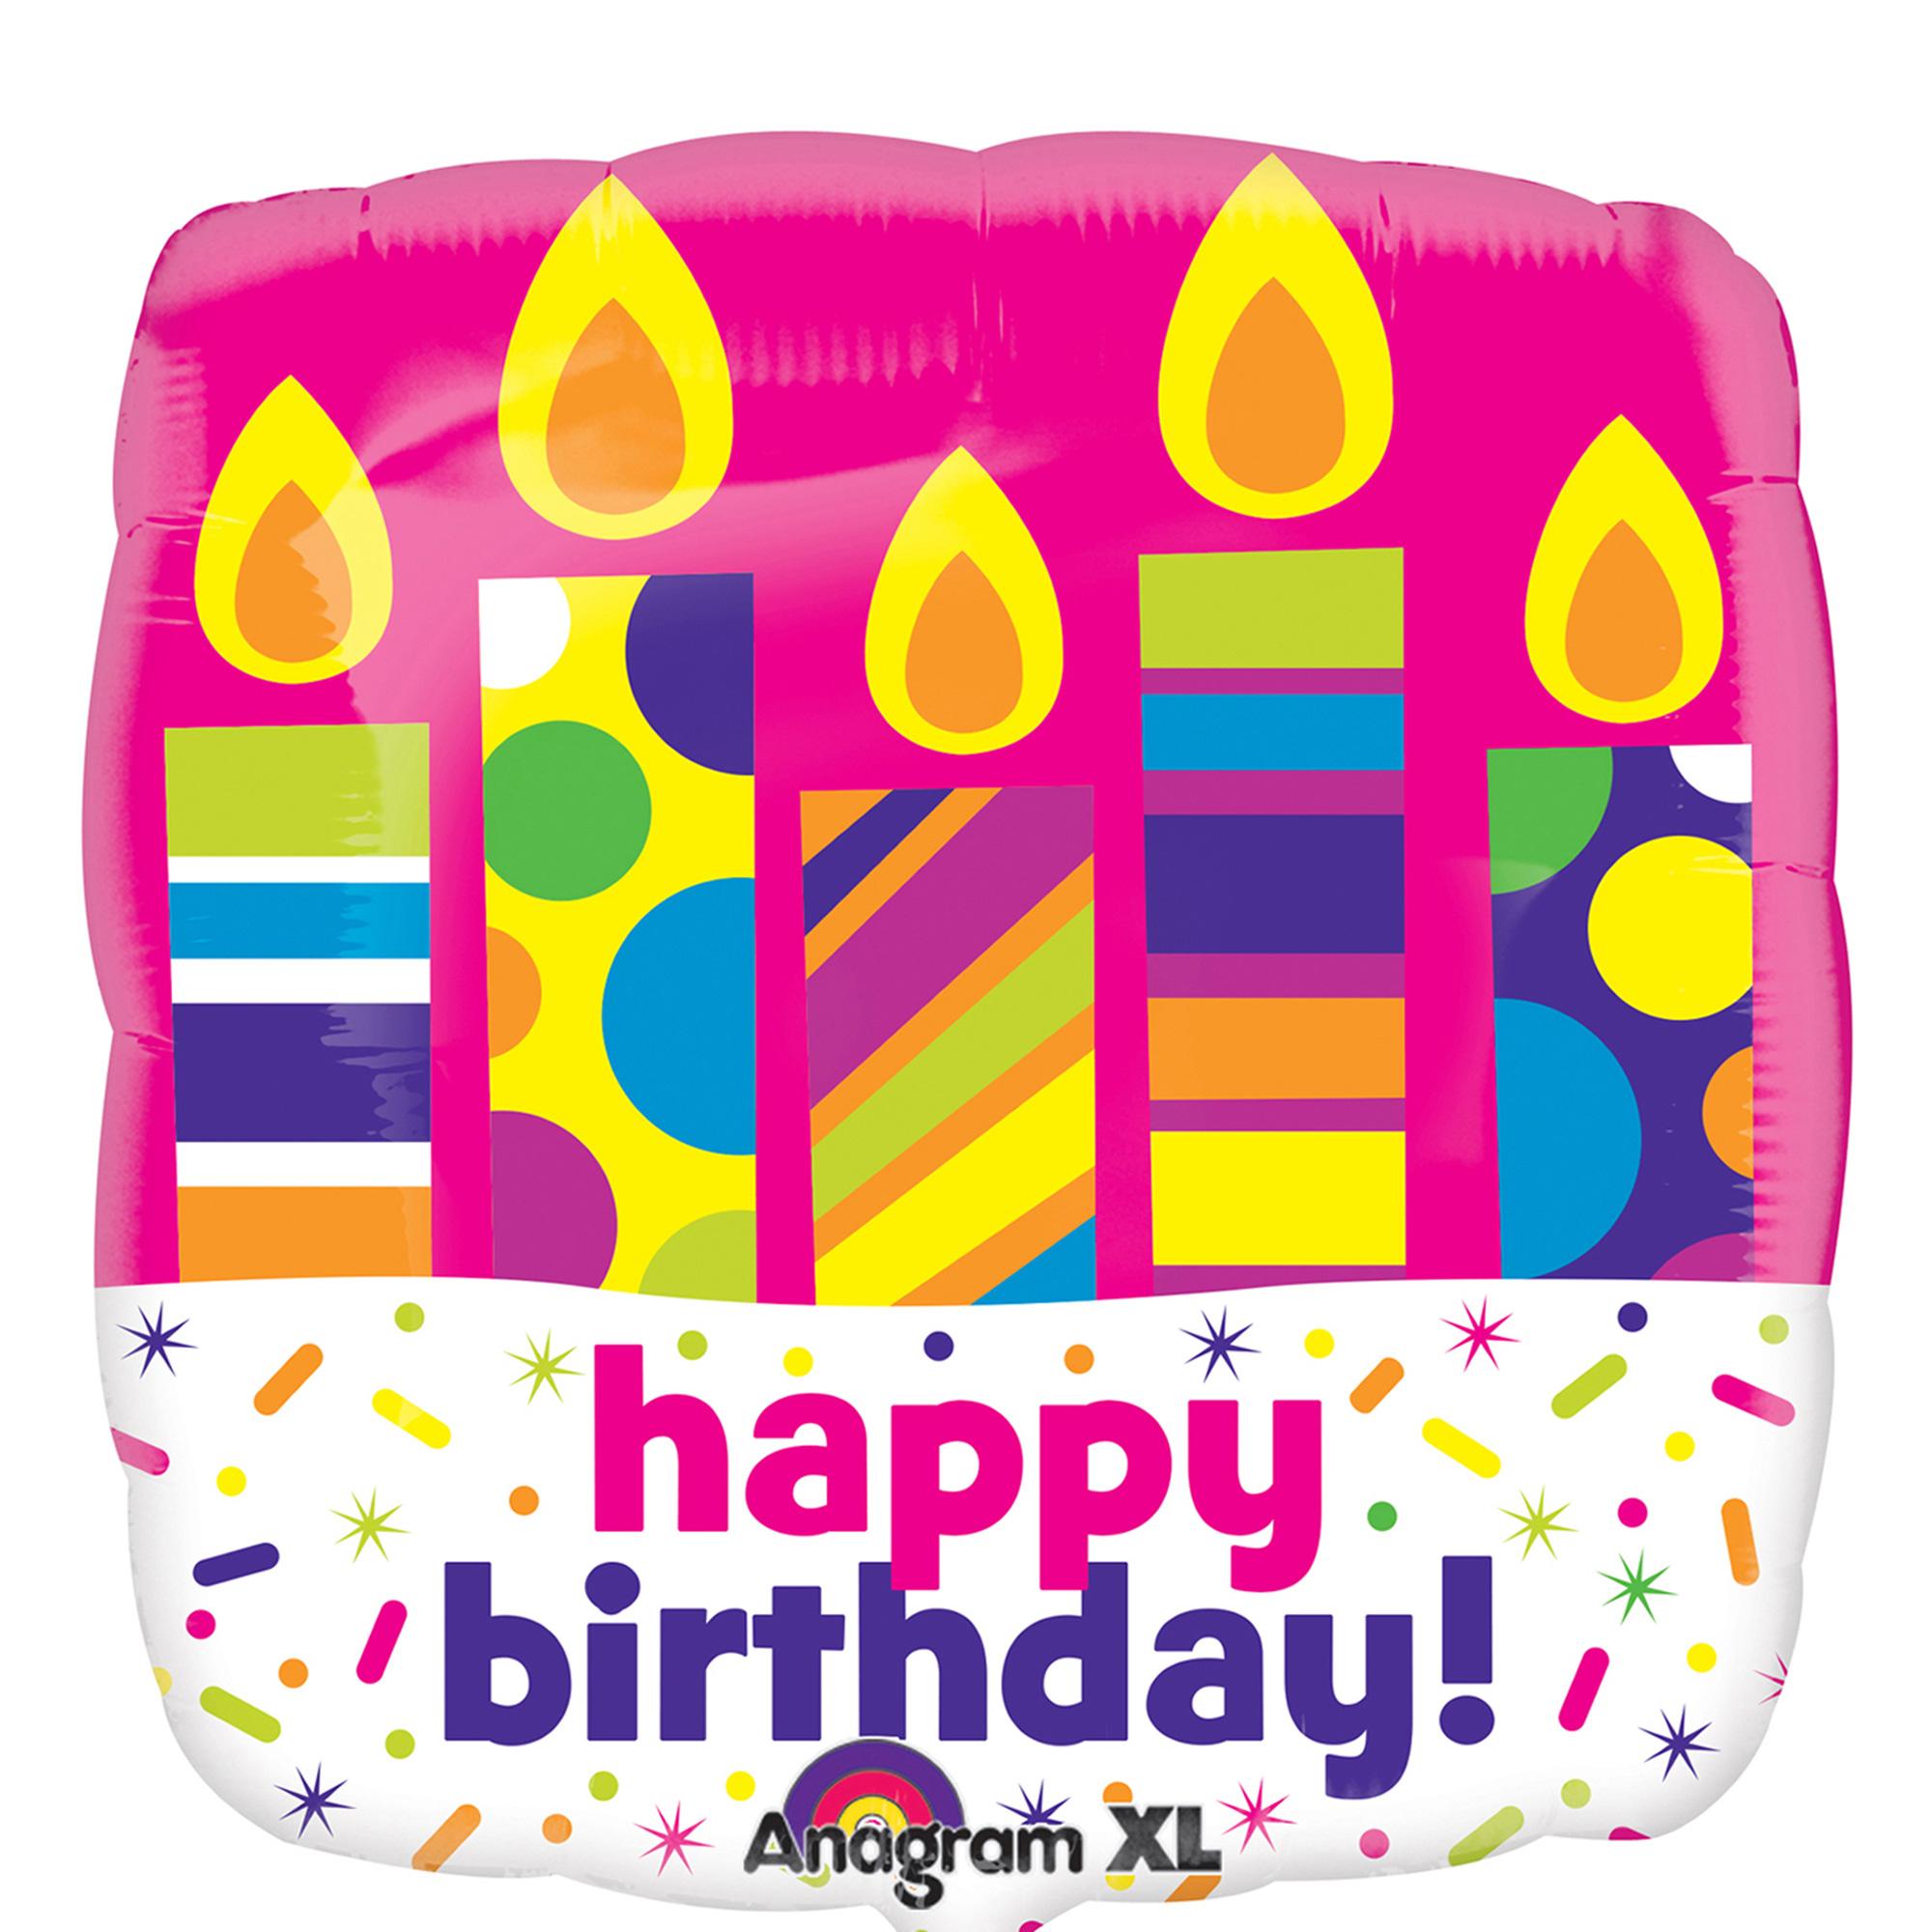 Happy Birthday Candle Blast Square Balloon 21in Balloons & Streamers - Party Centre